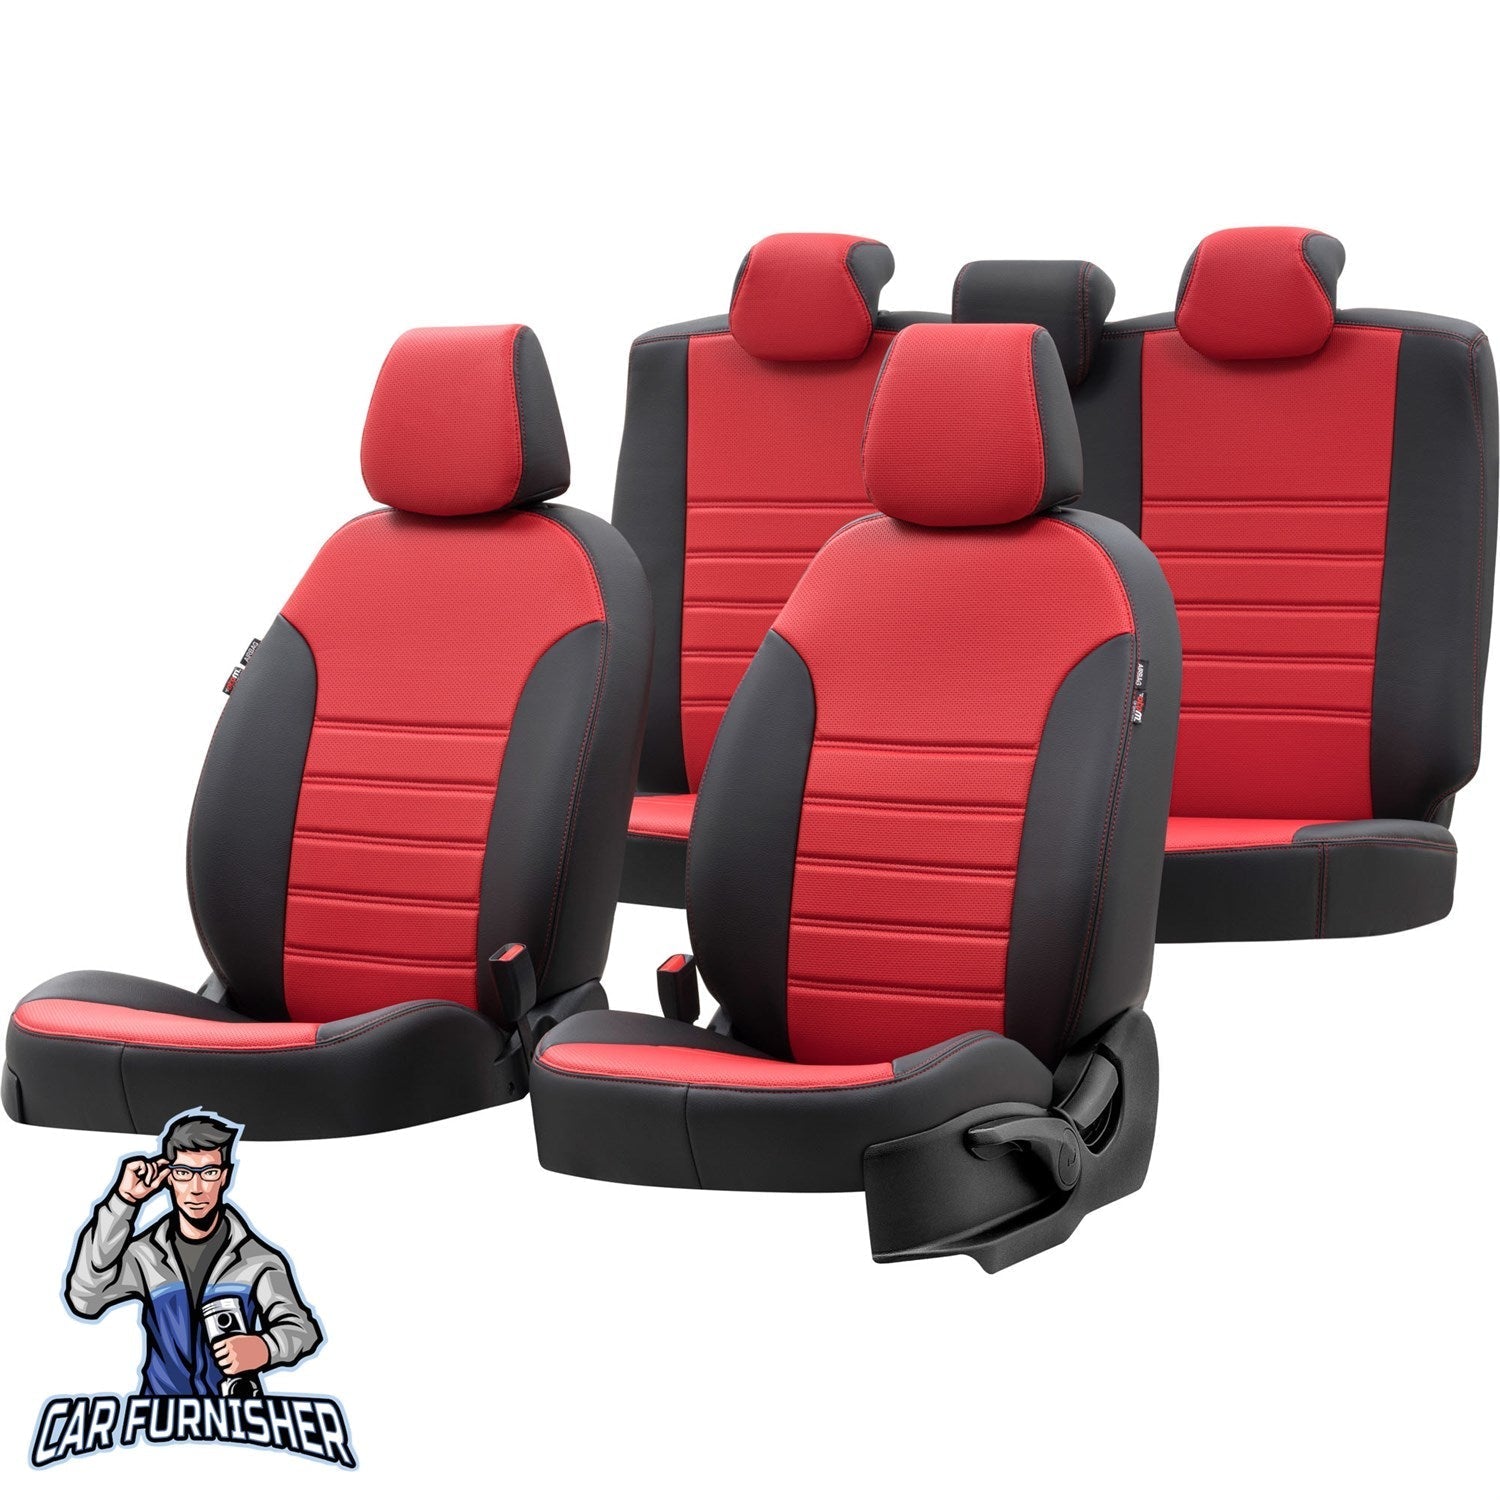 Skoda Roomster Car Seat Covers 2007-2014 New York Design Red Leather